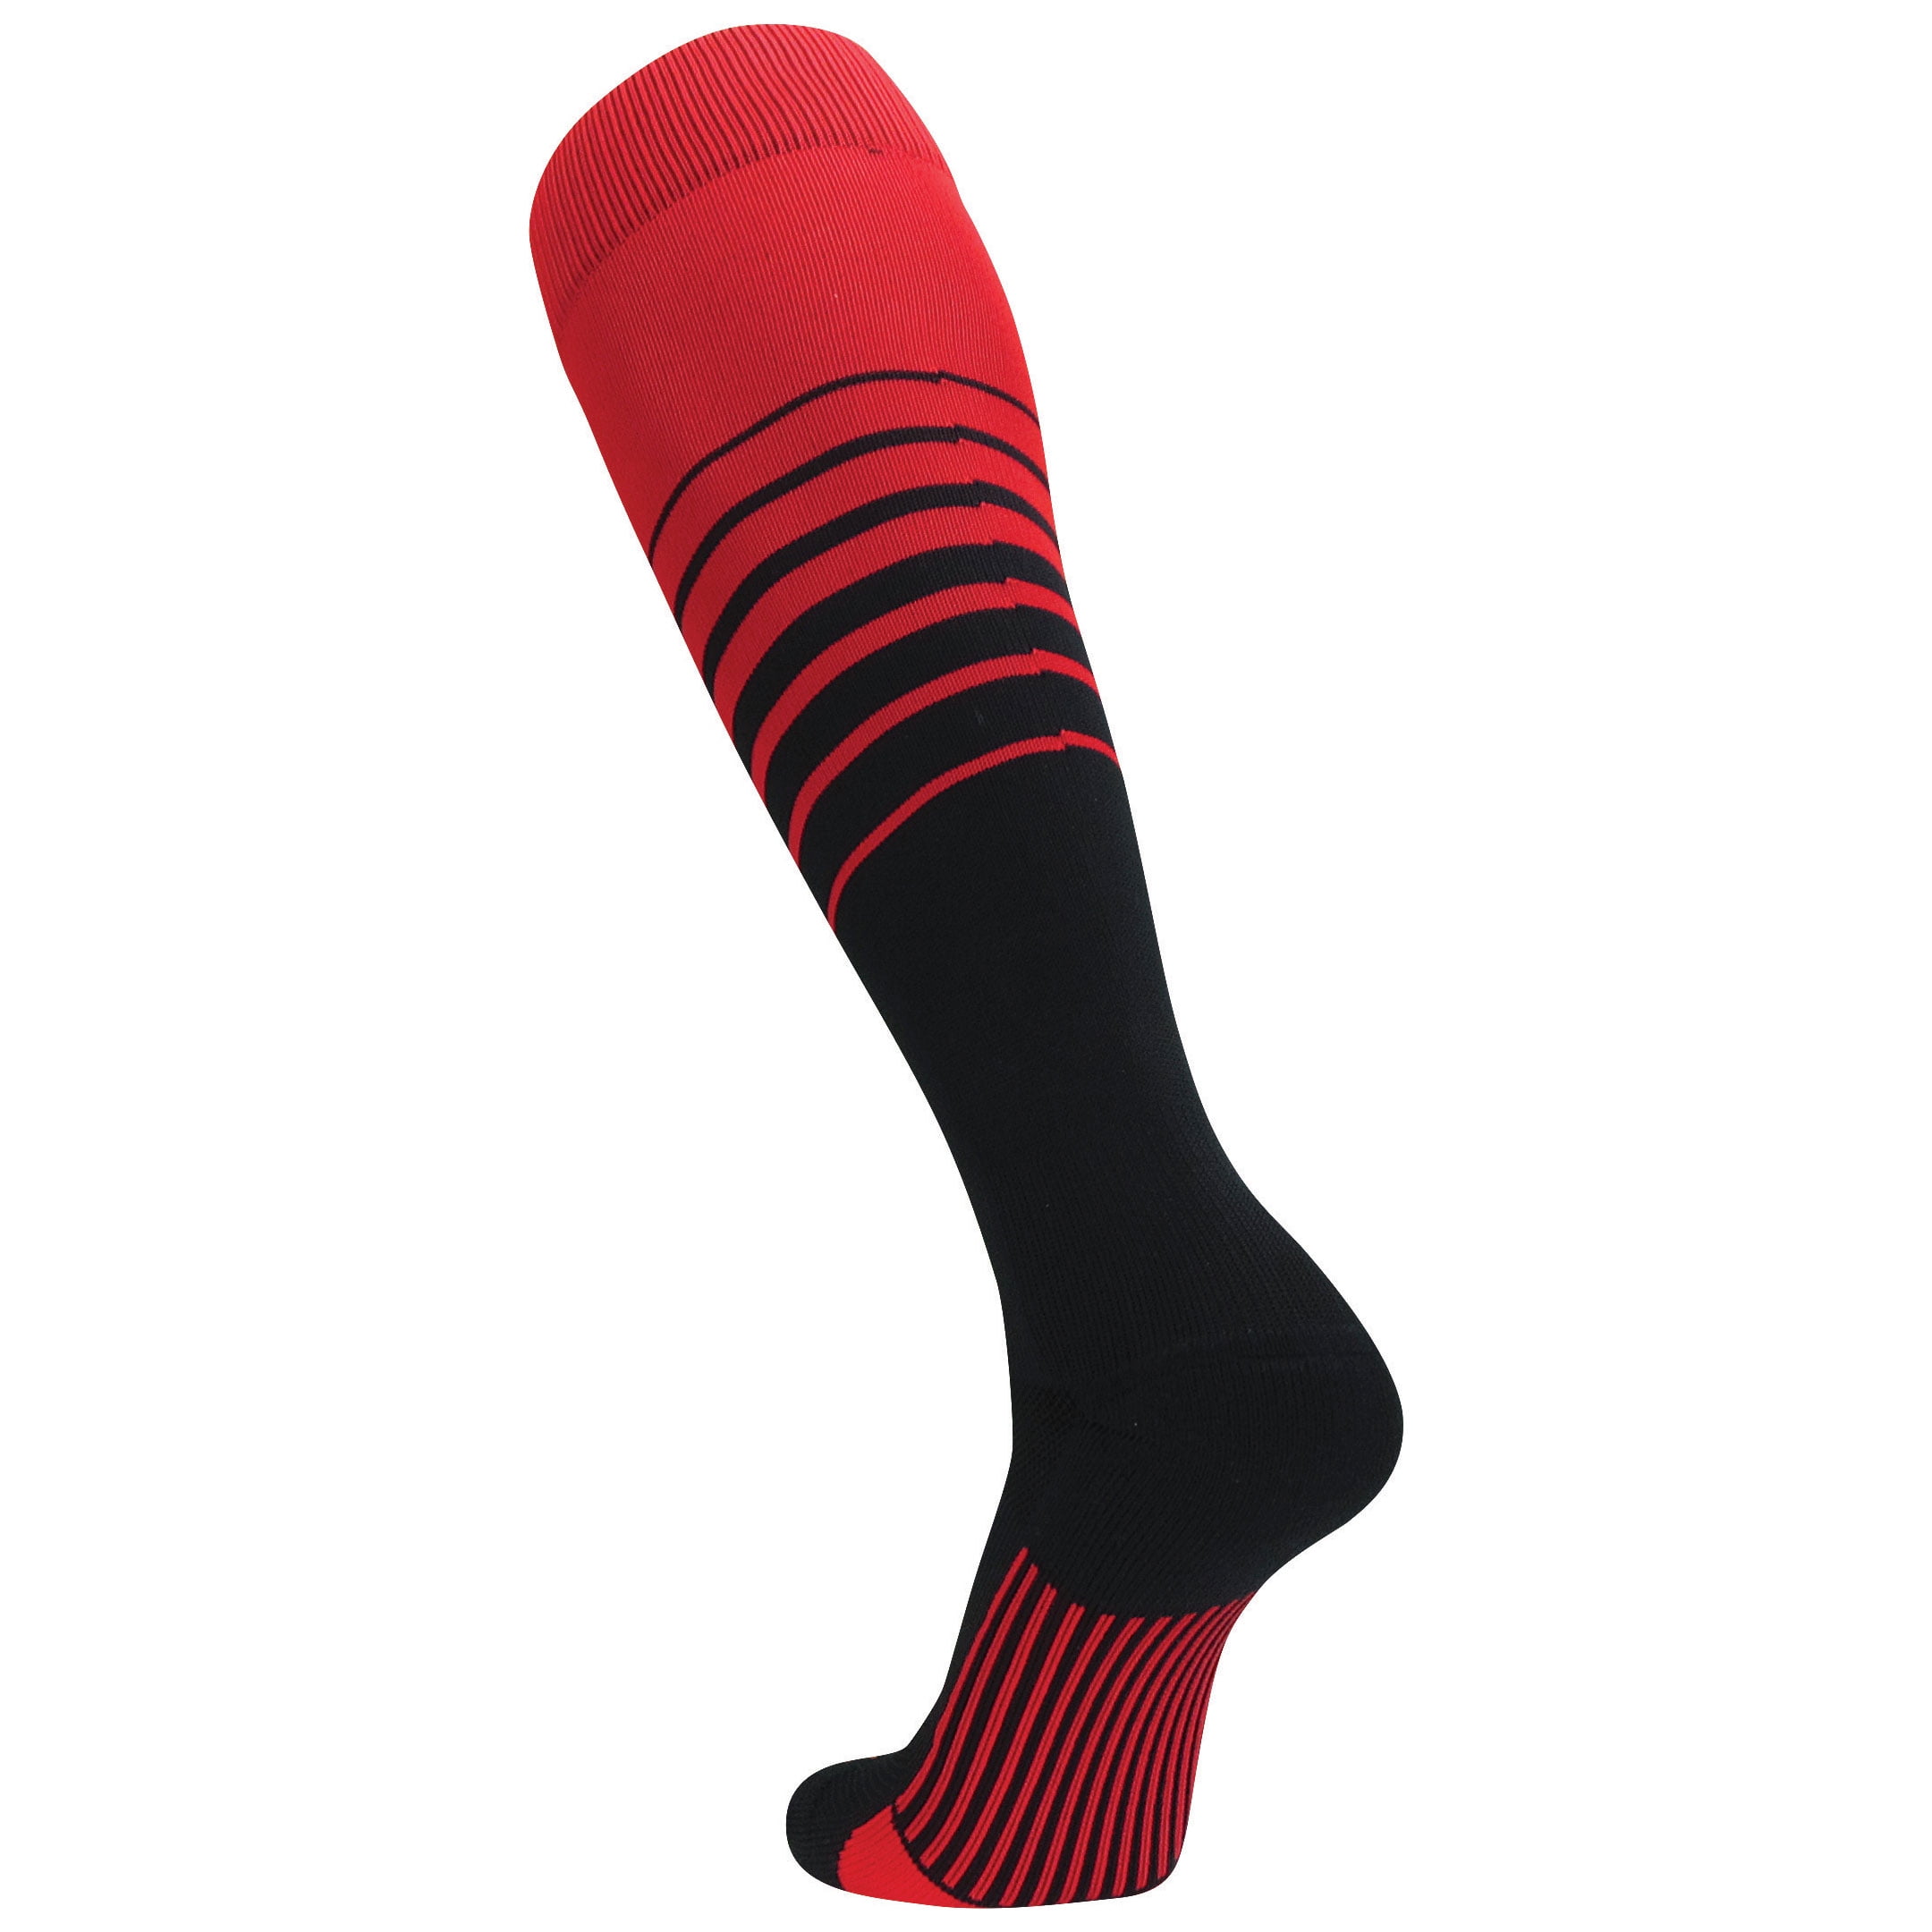 CLEARANCE Prostar Max Team Socks Mens Yellow Red Set of 17 